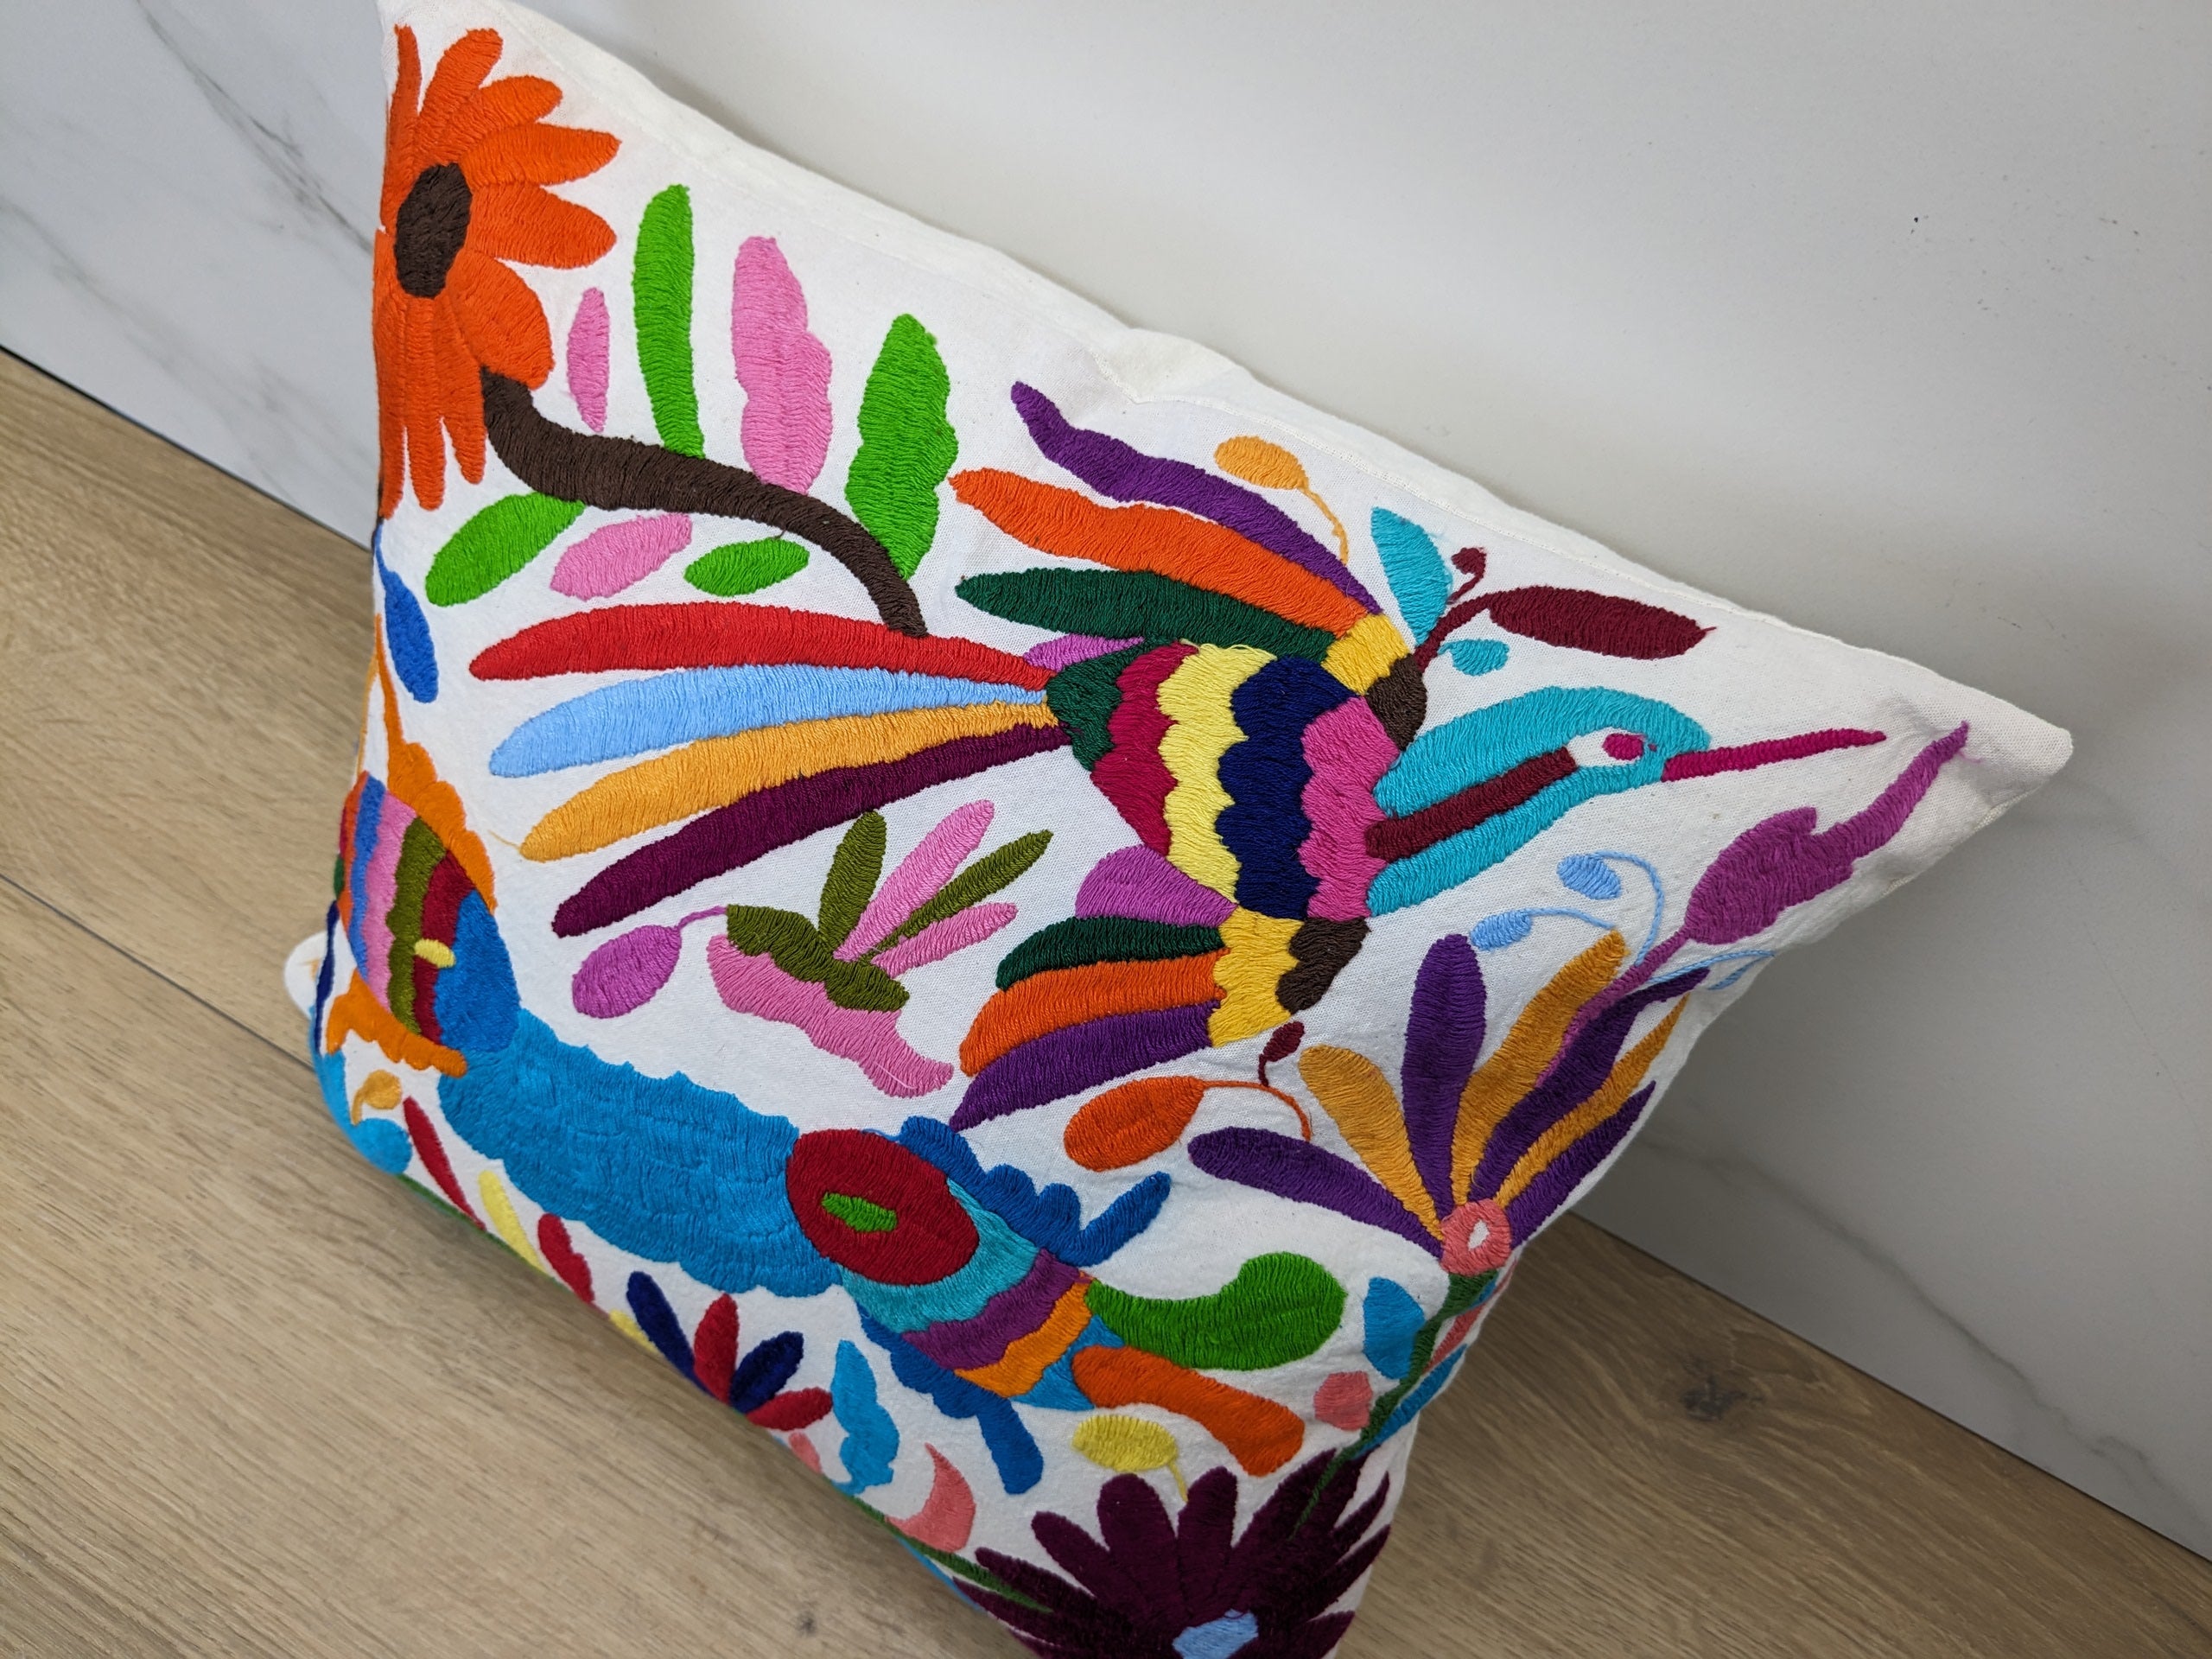 Multicolor Mexican Embroidered Throw Pillow Cover with Birds, Flowers, Animals, and Fish. Handmade in Mexico. We package and ship from the USA. Buy now at www.felipeandgrace.com.